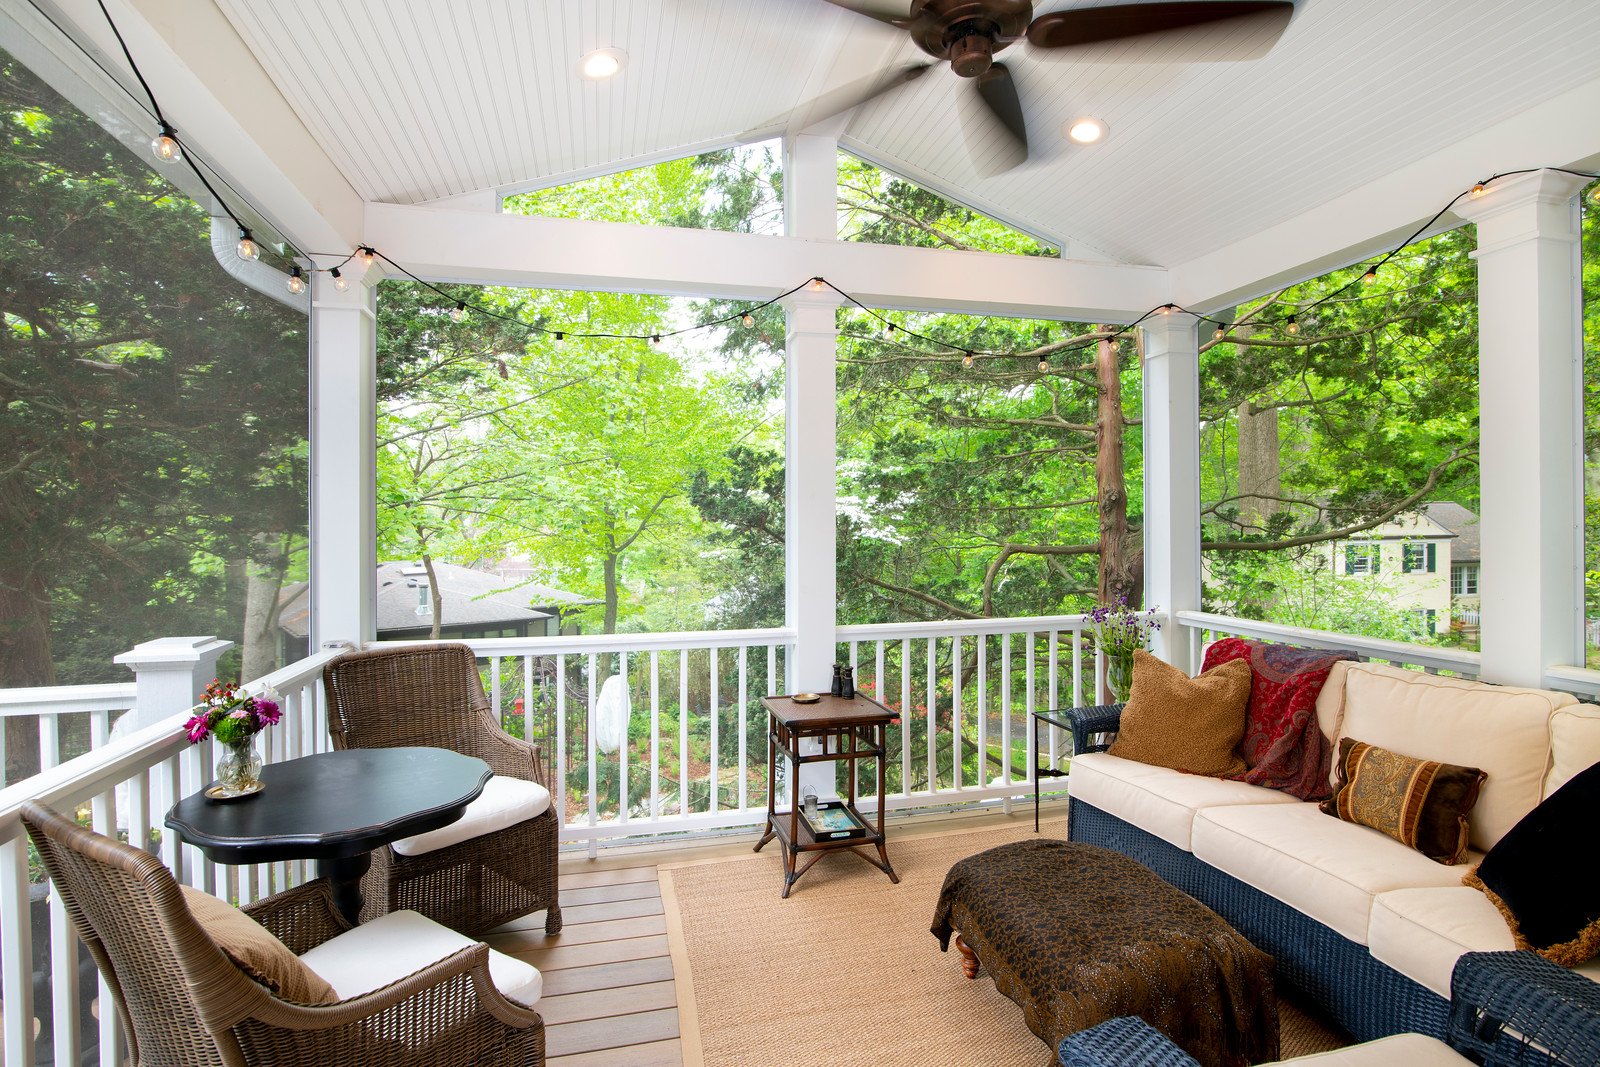 How Much Does a Screened-In Porch Cost in 2021?